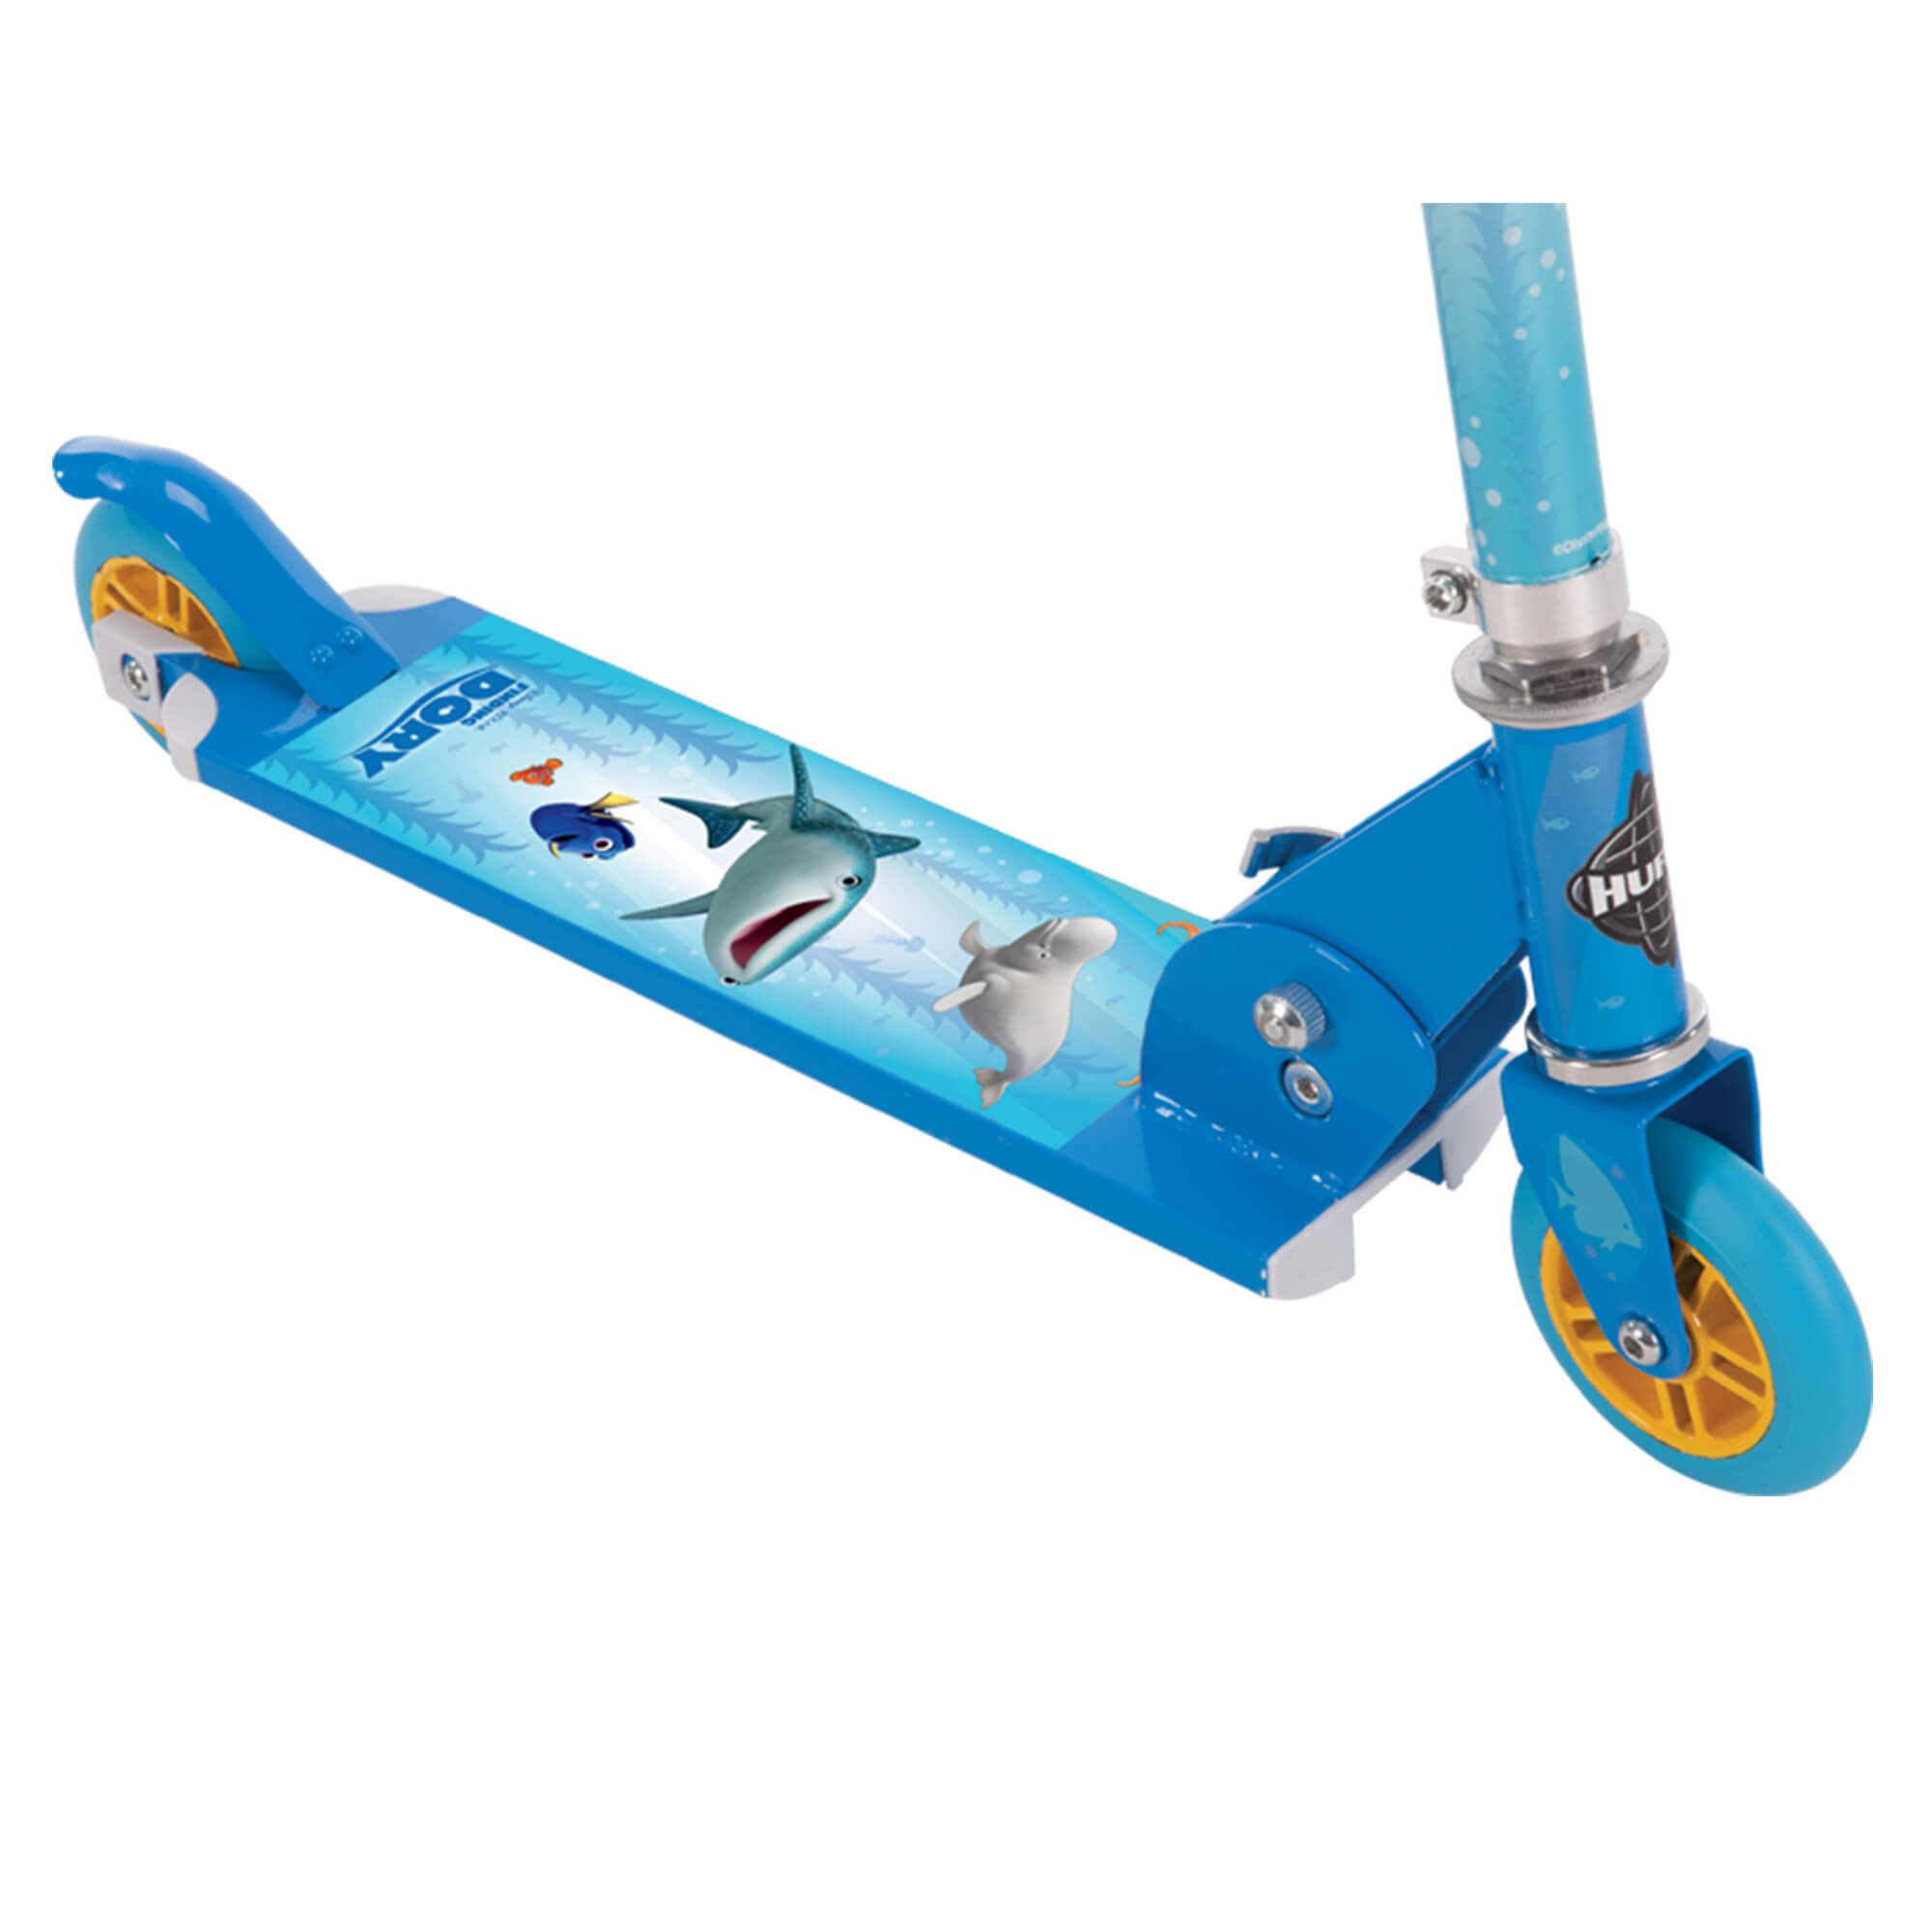 Disney Finding Dory Girls' 2-Wheel Inline Blue Scooter, by Huffy® - image 2 of 3